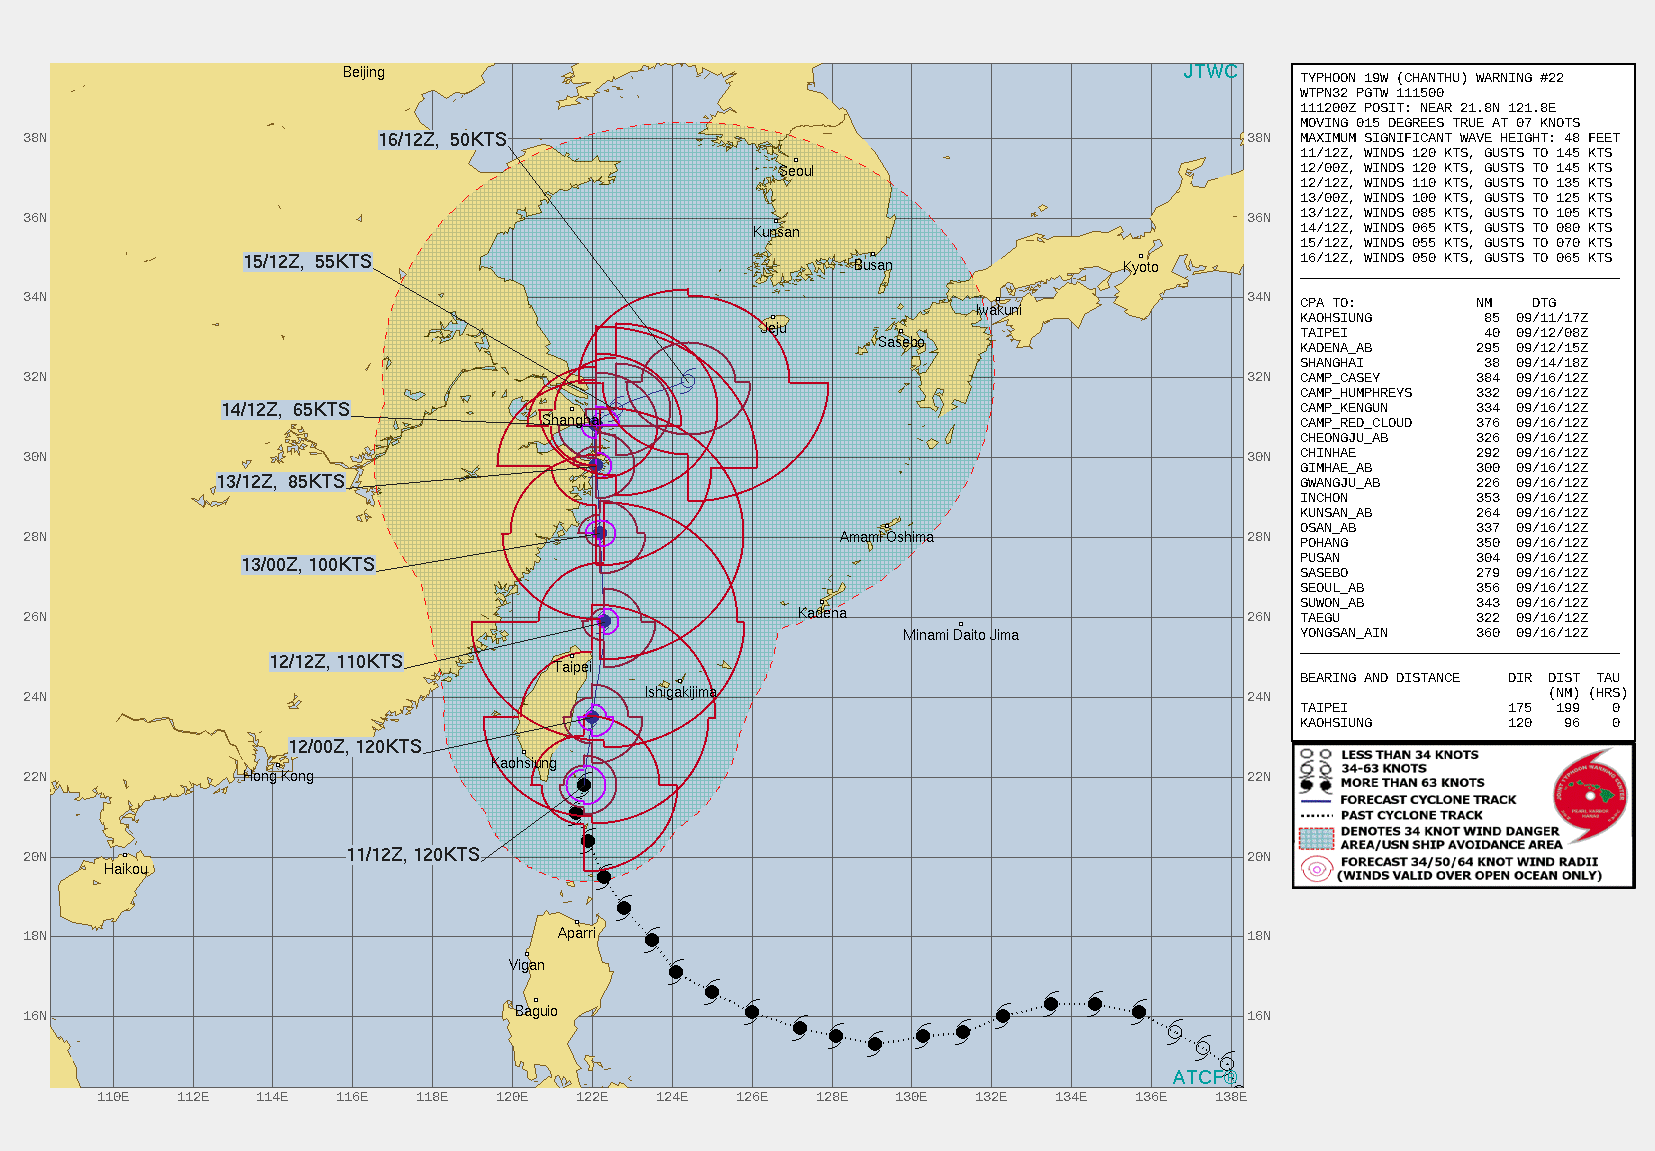 TY 19W(CHANTHA). WARNING 22 ISSUED AT 11/15UTC.SIGNIFICANT FORECAST CHANGES: THERE ARE NO SIGNIFICANT CHANGES TO THE FORECAST FROM THE PREVIOUS WARNING.  FORECAST DISCUSSION: TY 19W CONTINUES TO DEMONSTRATE A HIGH DEGREE OF RESILIENCE, AND WHILE WEAKENING SIGNIFICANTLY SINCE THE PREVIOUS ANALYSIS, IT STILL SHOWS SIGNS OF TRYING TO INTENSIFY. THE RAGGED EYE SEEN AT 1200Z HAS BECOME BETTER ORGANIZED AND THE CORE CONVECTION HAS BECOME MORE SYMMETRICAL IN THE SUBSEQUENT HOURS. THE SYSTEM HAS FOUGHT OFF A BAND OF DRY AIR THAT WAS INTRUDING INTO THE CORE, AND HAS PUSHED BACK AGAINST AND EARLIER BOUGHT OF NORTHERLY SHEAR. THE SYSTEM IS MOVING ACROSS A TONGUE OF MODERATELY HIGH OCEAN HEAT CONTENT(OHC) TO THE EAST OF LAN YU ISLAND, SUPPORTING THE IMPROVED  REPRESENTATION IN THE ENHANCED INFRA-RED SAT. TY 19W IS MOVING NORTH ALONG THE WESTERN PERIPHERY OF A NORTH-SOUTH ORIENTED STR CENTERED SOUTHEAST OF HONSHU AND IS EXPECTED TO MAINTAIN THIS TRACK THROUGH 48H. THE SYSTEM MAY MOVE SLIGHTLY LEFT OF THE TRACK AS IT INTERACTS WITH AND IS PULLED TOWARDS THE CENTRAL MOUNTAIN RANGE OF TAIWAN, BUT OTHERWISE SHOULD SKIRT THE NORTHEAST TIP OF TAIWAN BEFORE CONTINUING INTO THE EAST CHINA SEA. BY 48H THE SYSTEM WILL MOVE INTO A WEAK STEERING PATTERN, CAUGHT BETWEEN RIDGES CENTERED EAST OF KYUSHU, WEST OF SHANDONG AND OVER SOUTHEASTERN CHINA. IT IS EXPECTED THAT TY 19W WILL REMAIN QUASI-STATIONARY IN THE VICINITY OF SHANGHAI WHILE REMAINING COCOONED IN THIS WEAK STEERING PATTERN THOUGH AT LEAST 96H. BY 120H THE WESTERN RIDGE IS EXPECTED TO ERODE AHEAD OF AN APPROACHING MID-LATITUDE TROUGH WHICH WILL ALLOW THE SYSTEM TO START MOVING EASTWARD BY 120H. IN THE NEAR TERM, TY 19W IS EXPECTED TO MAINTAIN ITS CURRENT INTENSITY AS IT CONTINUES MOVING OVER THE HIGH OHC WATERS. HOWEVER, INCREASING VERTICAL WIND SHEAR AND INTERACTION WITH THE RUGGED TERRAIN OF TAIWAN WILL RESULT IN STEADY WEAKENING AFTER 24H. ONCE THE SYSTEM SLOWS AND REMAINS QUASI-STATIONARY NEAR SHANGHAI IT WILL RAPIDLY COME UNDER THE INFLUENCE OF INCREASING SHEAR, COOLER SSTS, AND CONVERGENT FLOW ALOFT, LEADING TO MORE RAPID WEAKENING THROUGH THE REMAINDER OF THE FORECAST PERIOD.